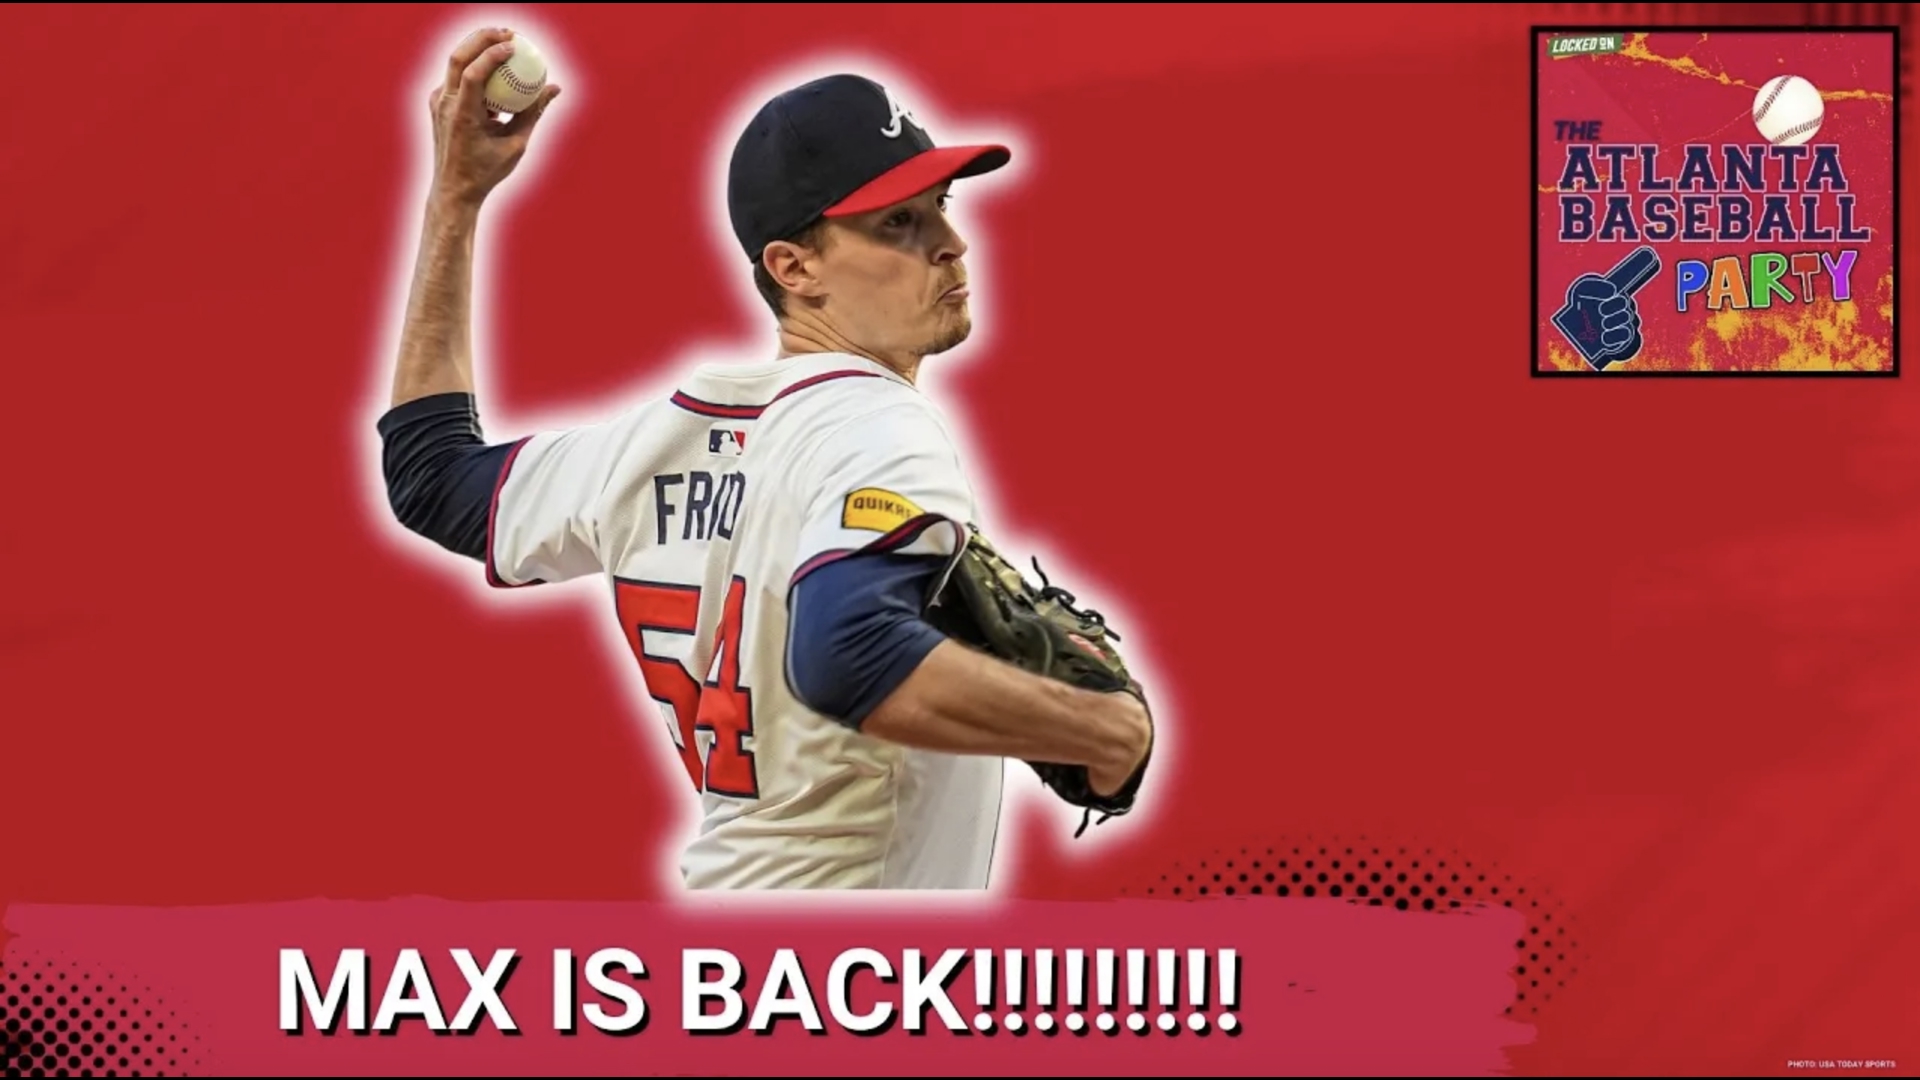 Max Fried and the Atlanta Braves shut out the Miami Marlins last night at Truist Park. Fried pitched a complete game against the Marlins